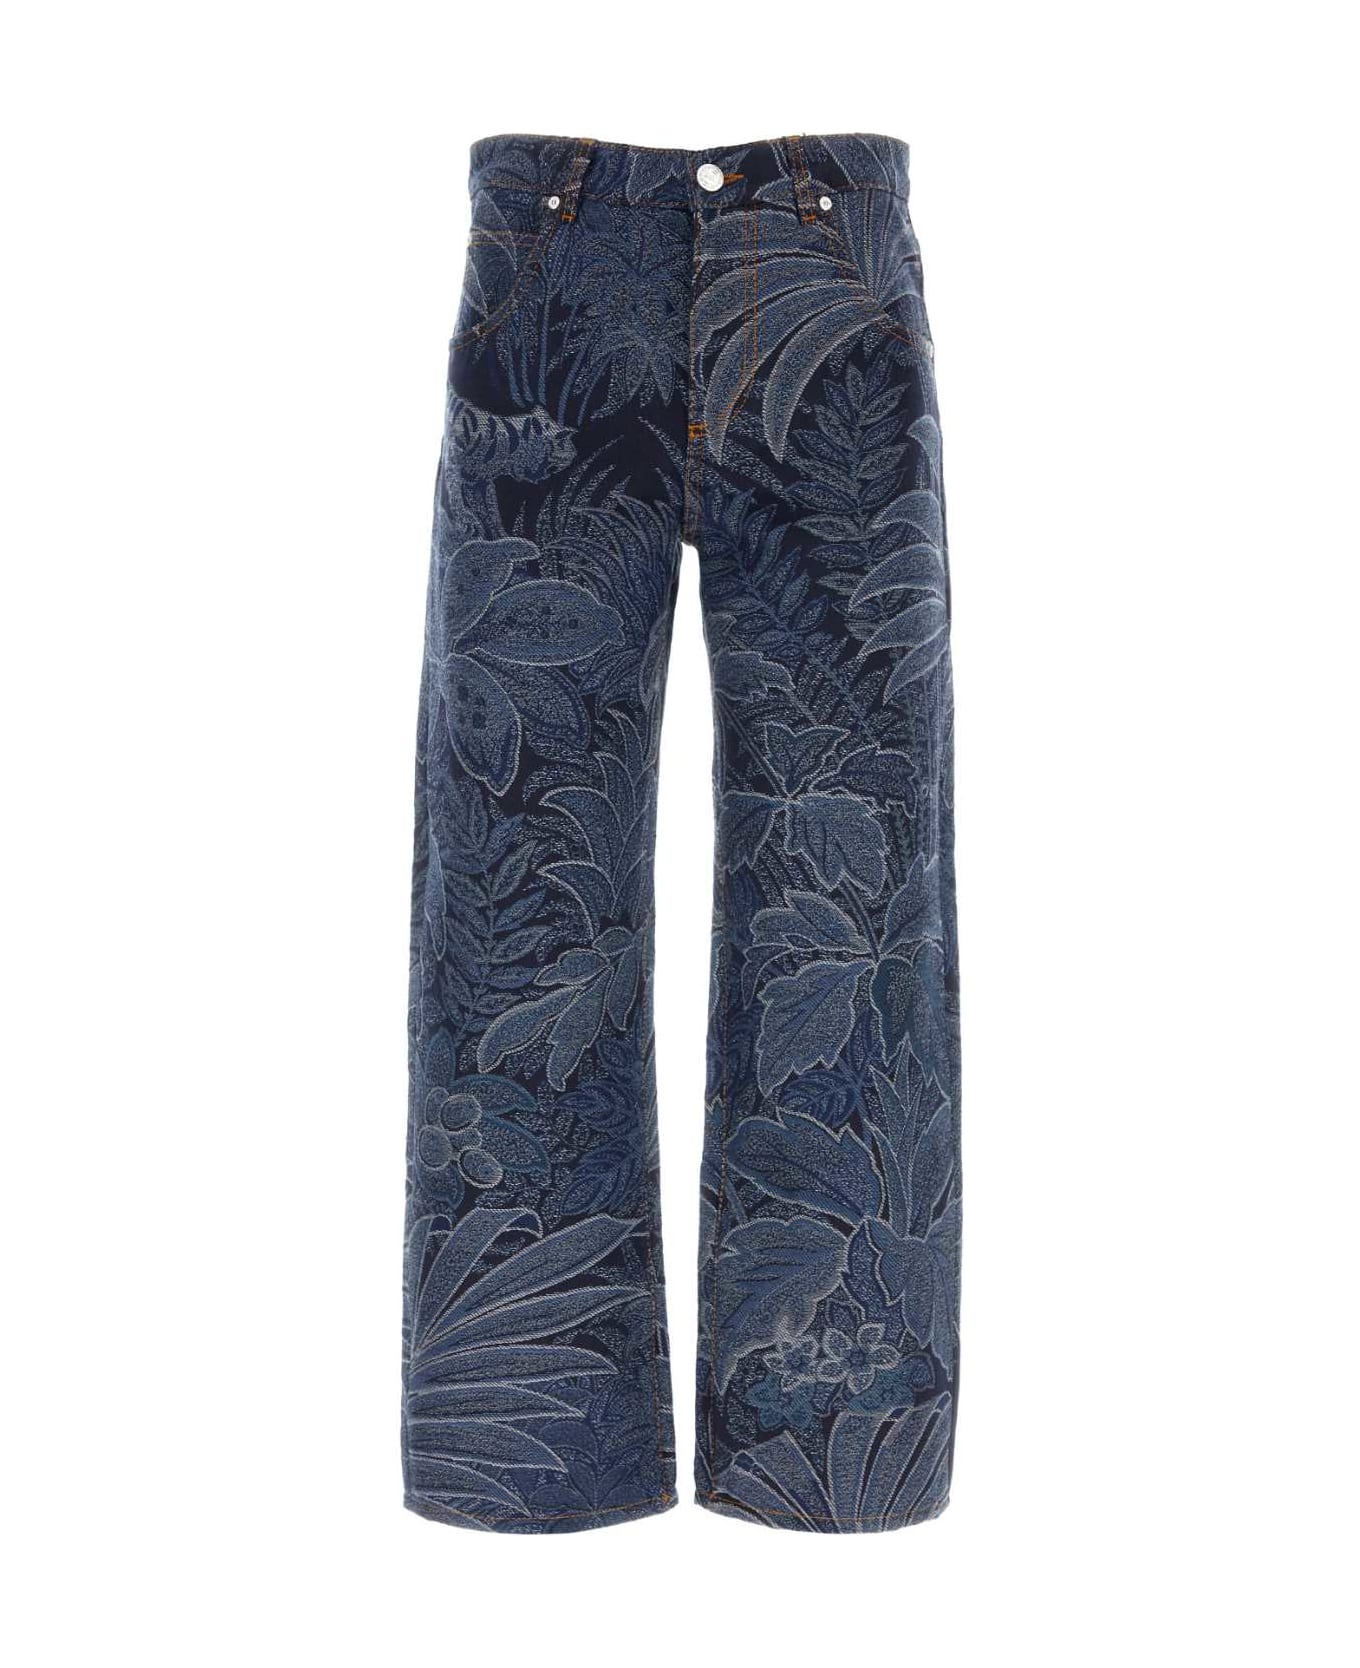 Etro Embroidered Denim Jeans - 250 ボトムス